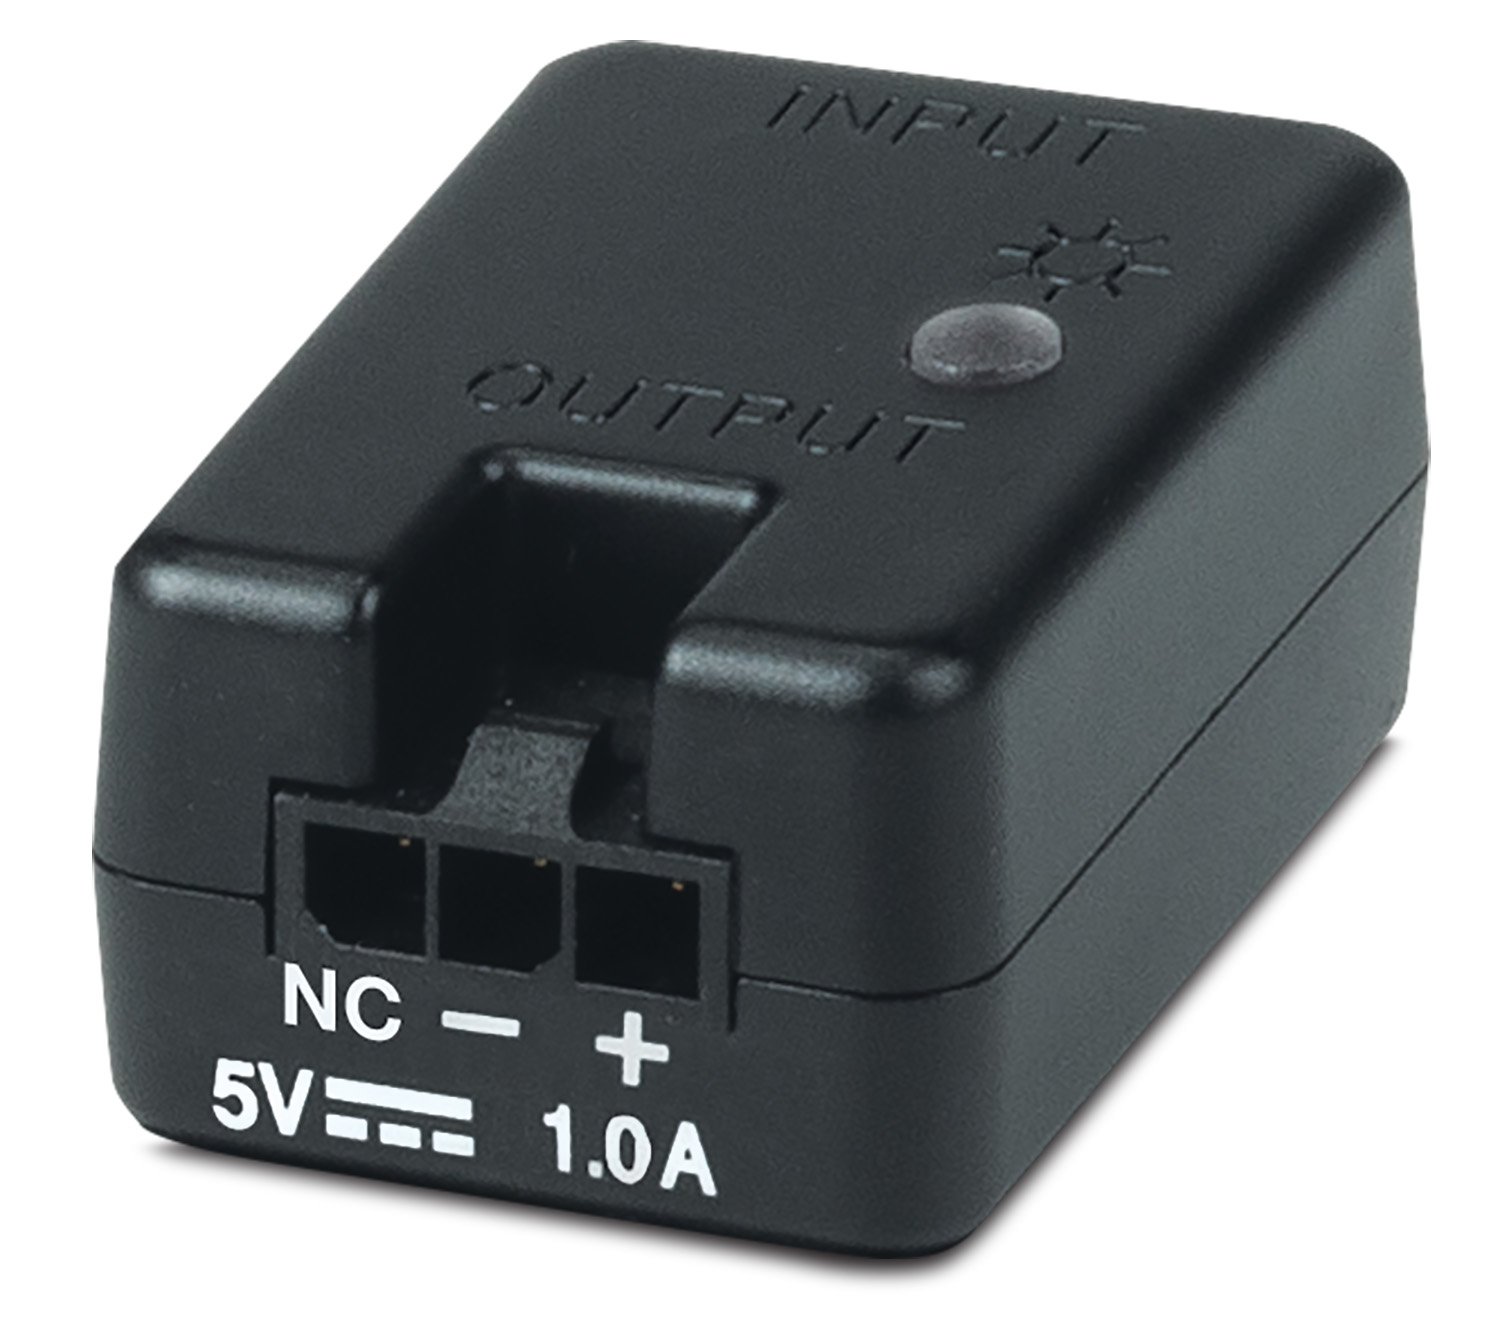 CPI 51 delivers 5V and 1A of current to the connected cable